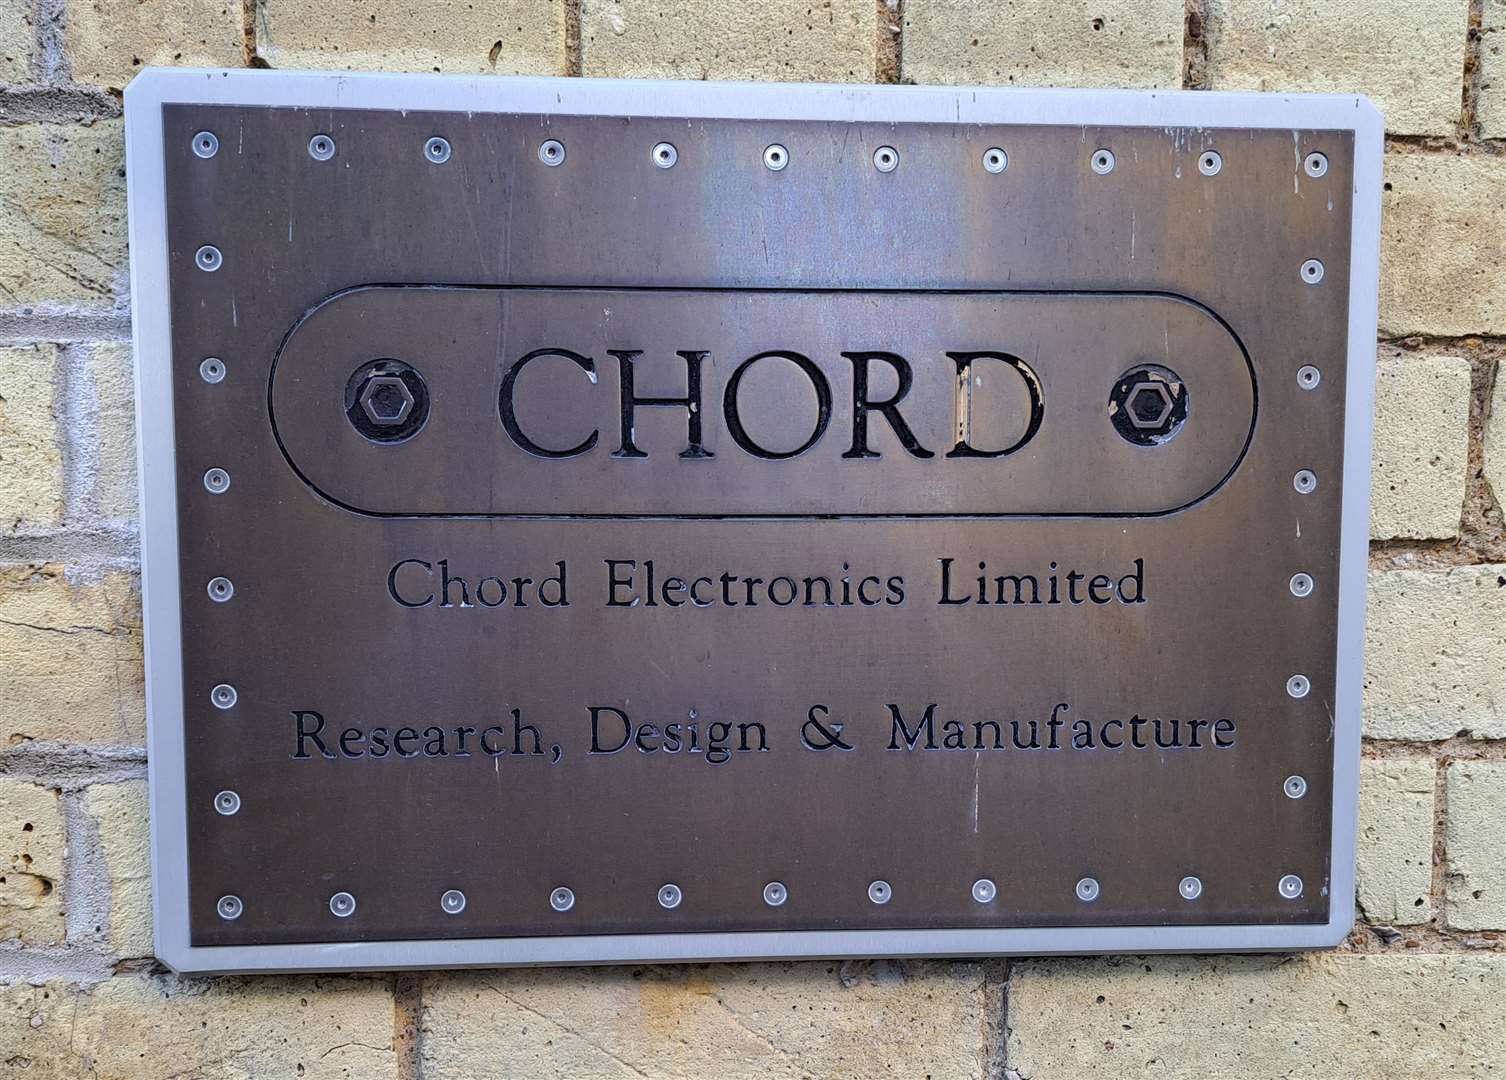 Chord Electronics owns both properties